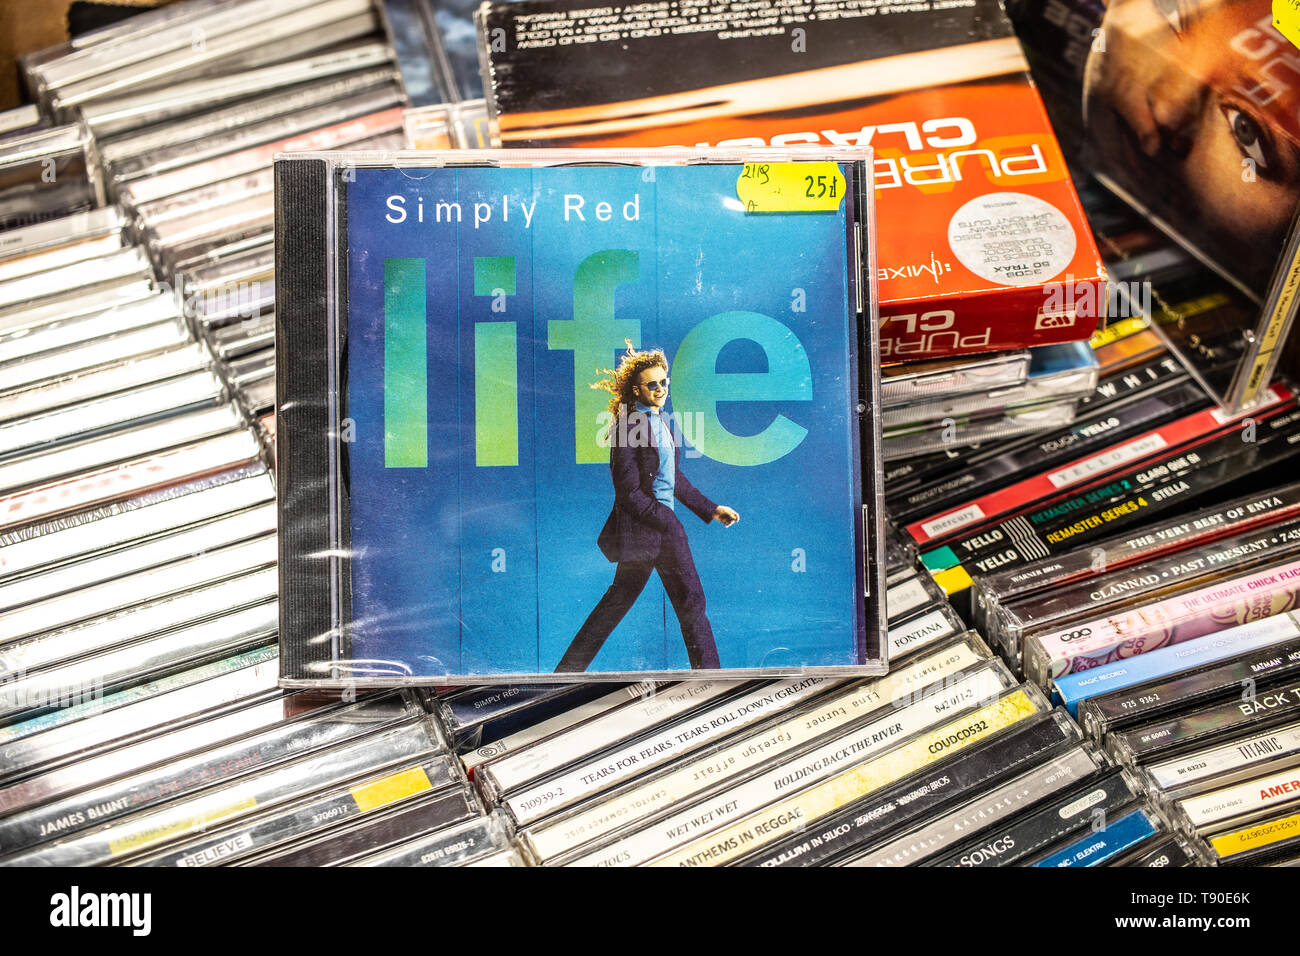 Nadarzyn, Poland, May 11, 2019: Simply Red LIFE CD album on display for sale, famous British soul and pop band, lead singer Mick Hucknall, collection Stock Photo